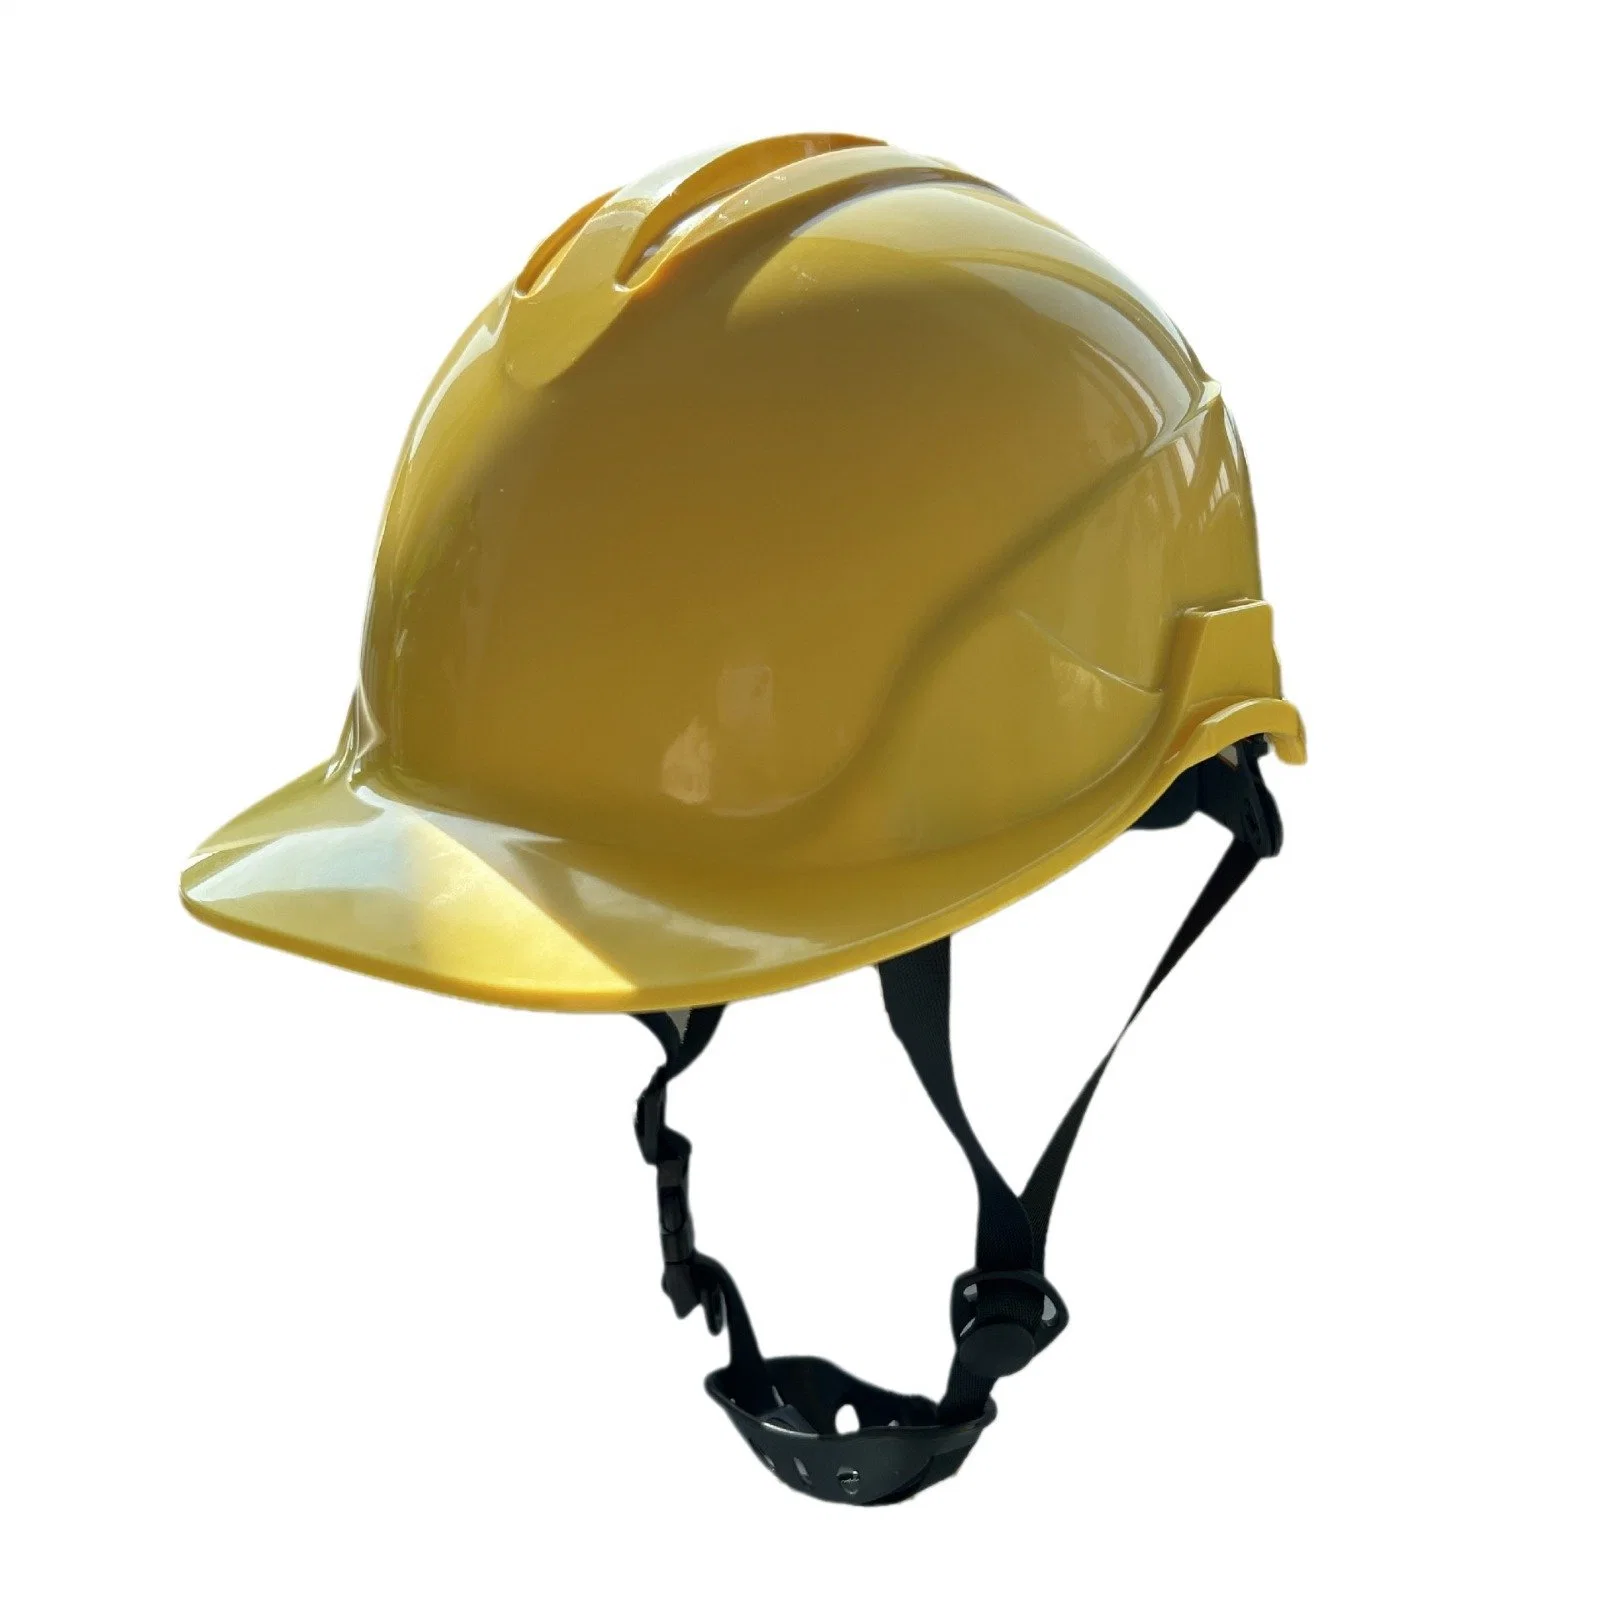 Working Site Construction Protective Helmet Hard Hat -Personal Safety Helmets